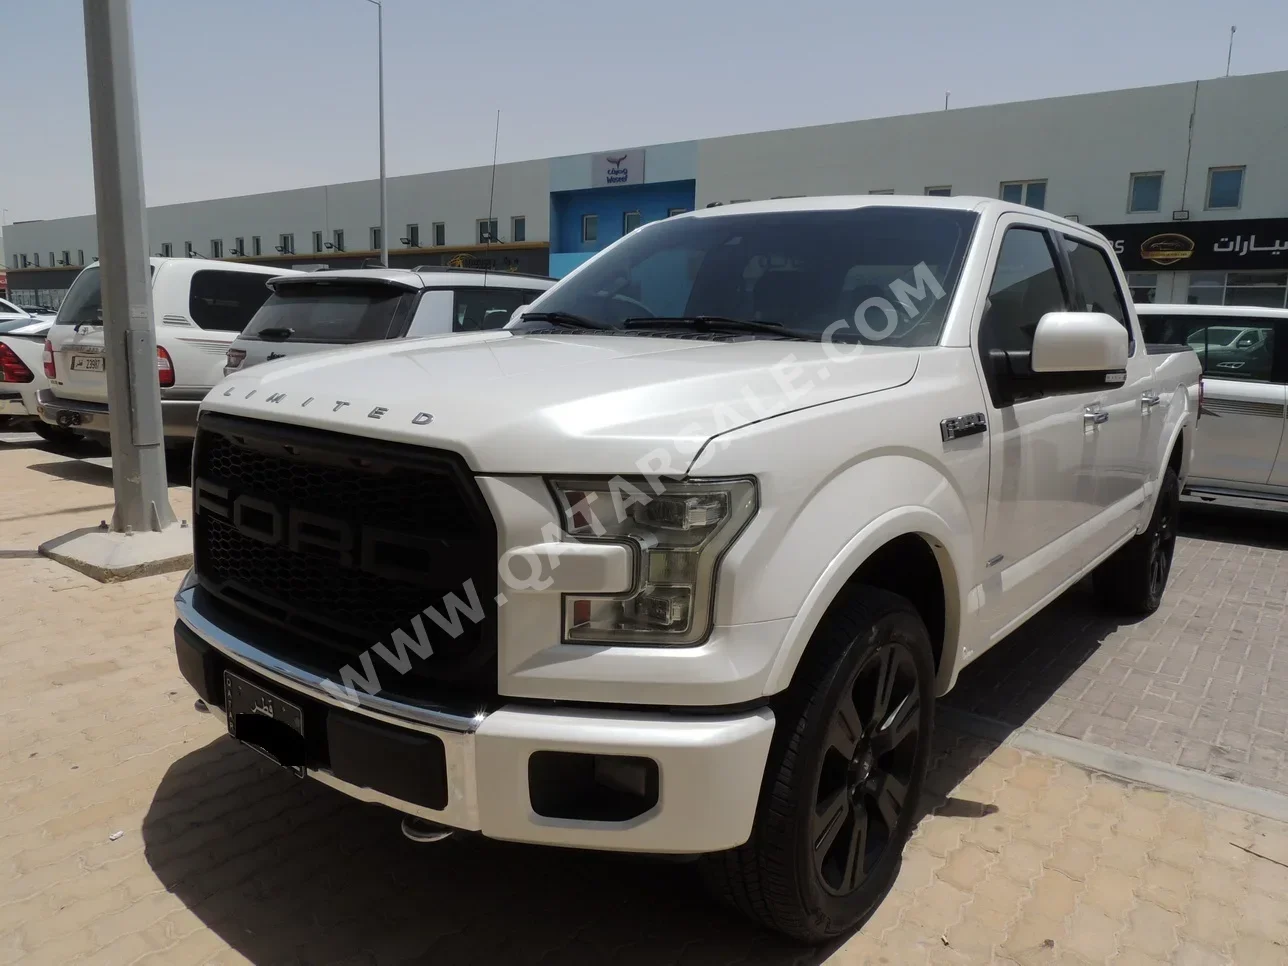 Ford  F  150 Limited  2017  Automatic  123,000 Km  6 Cylinder  Four Wheel Drive (4WD)  Pick Up  Silver